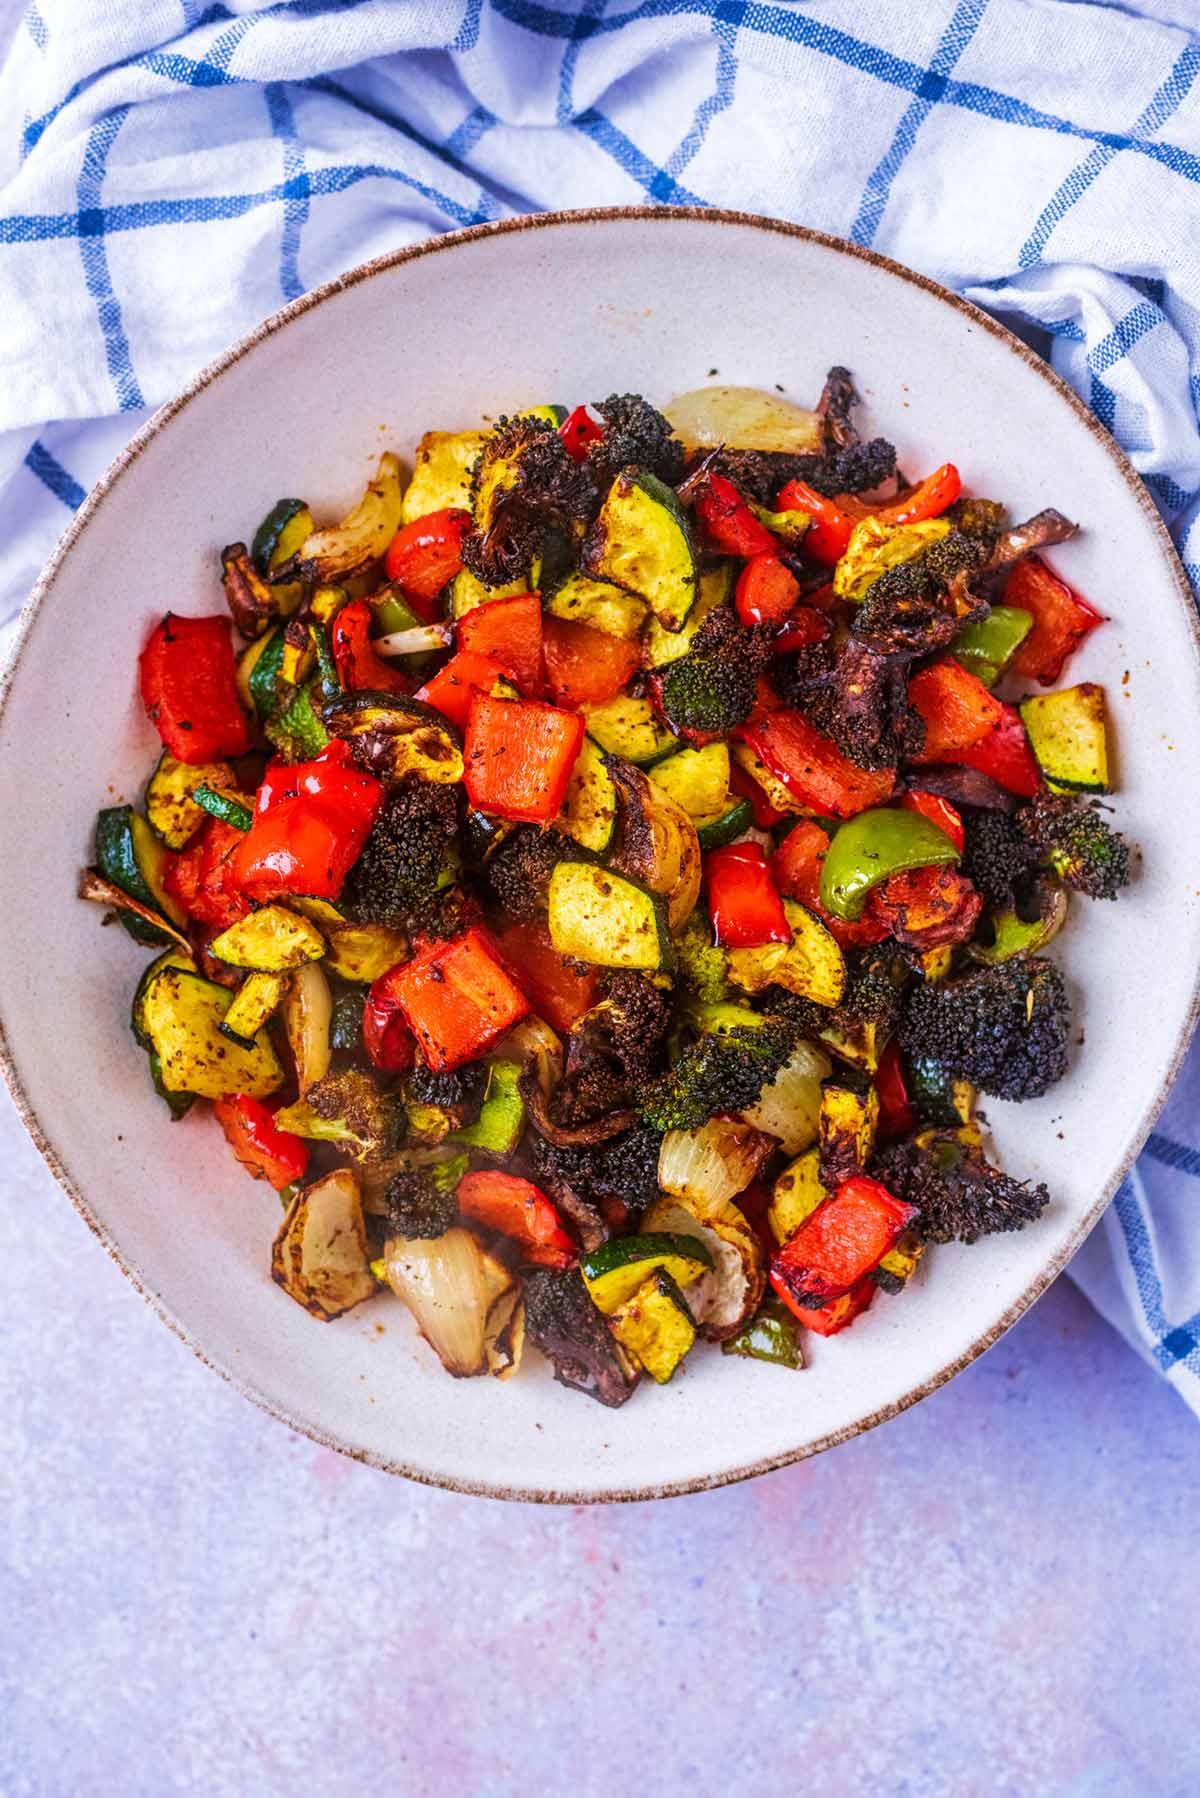 A bowl full of roasted vegetables next to a checked towel.